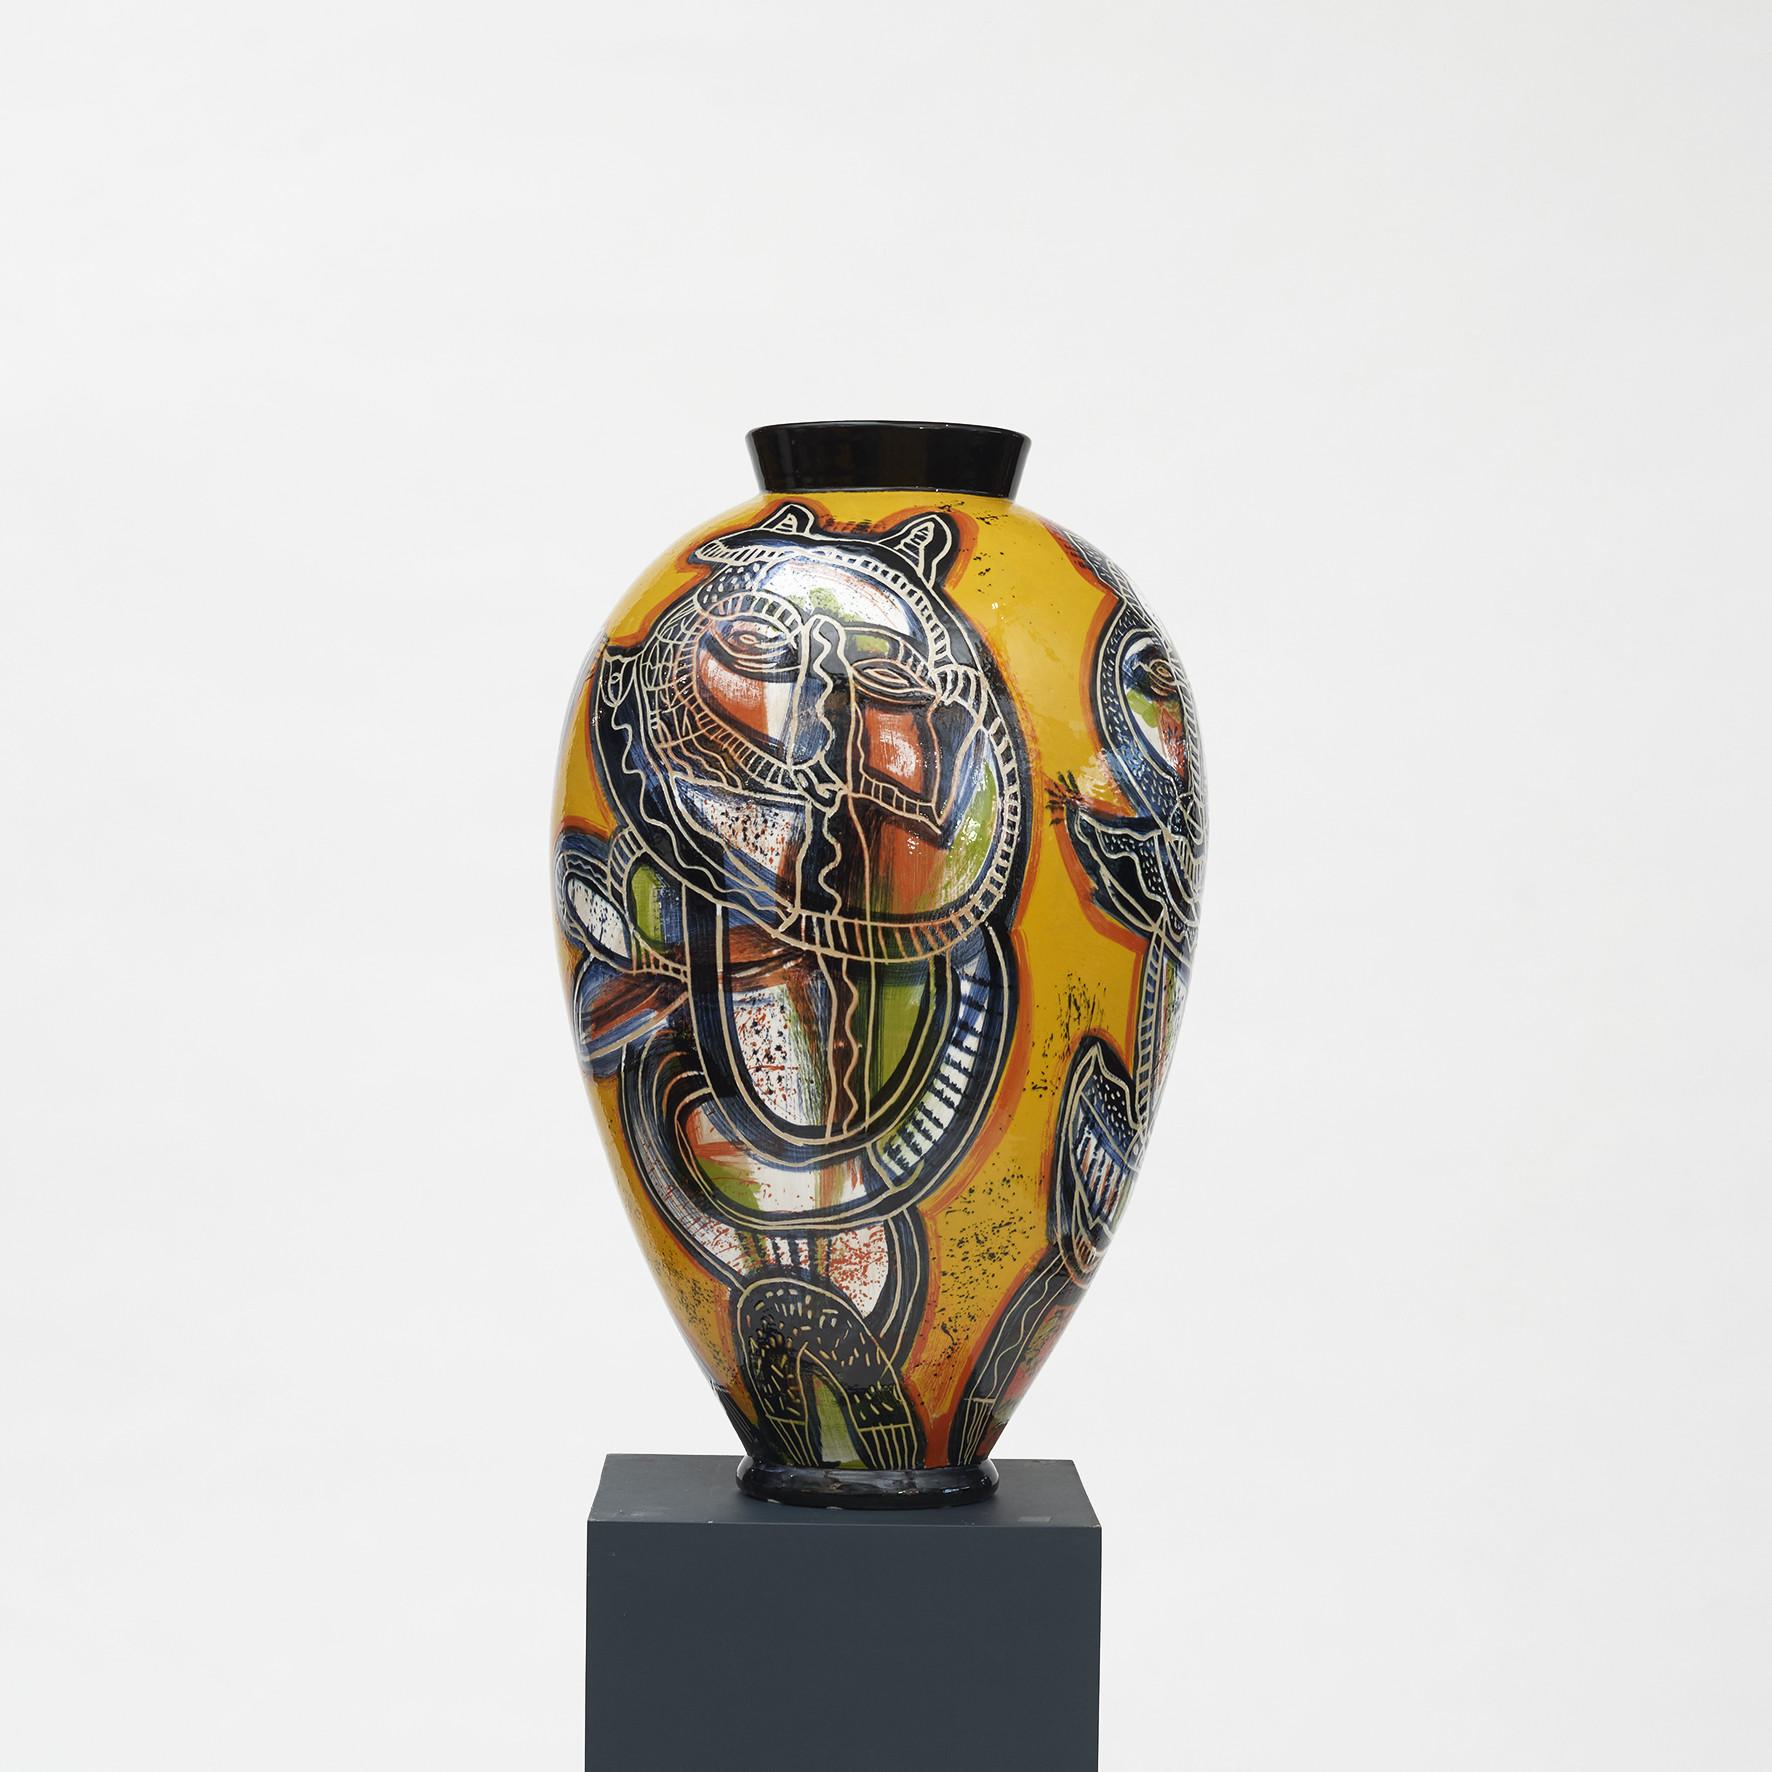 Lene Regius, born 1940. Danish ceramicist and artist.
Colossal stoneware vase. Unique, one of a kind.
Decorated with motifs inspired by African cultural history and COBRA, (or CoBrA), a European avant-garde art movement. Glazed in saturated, warm